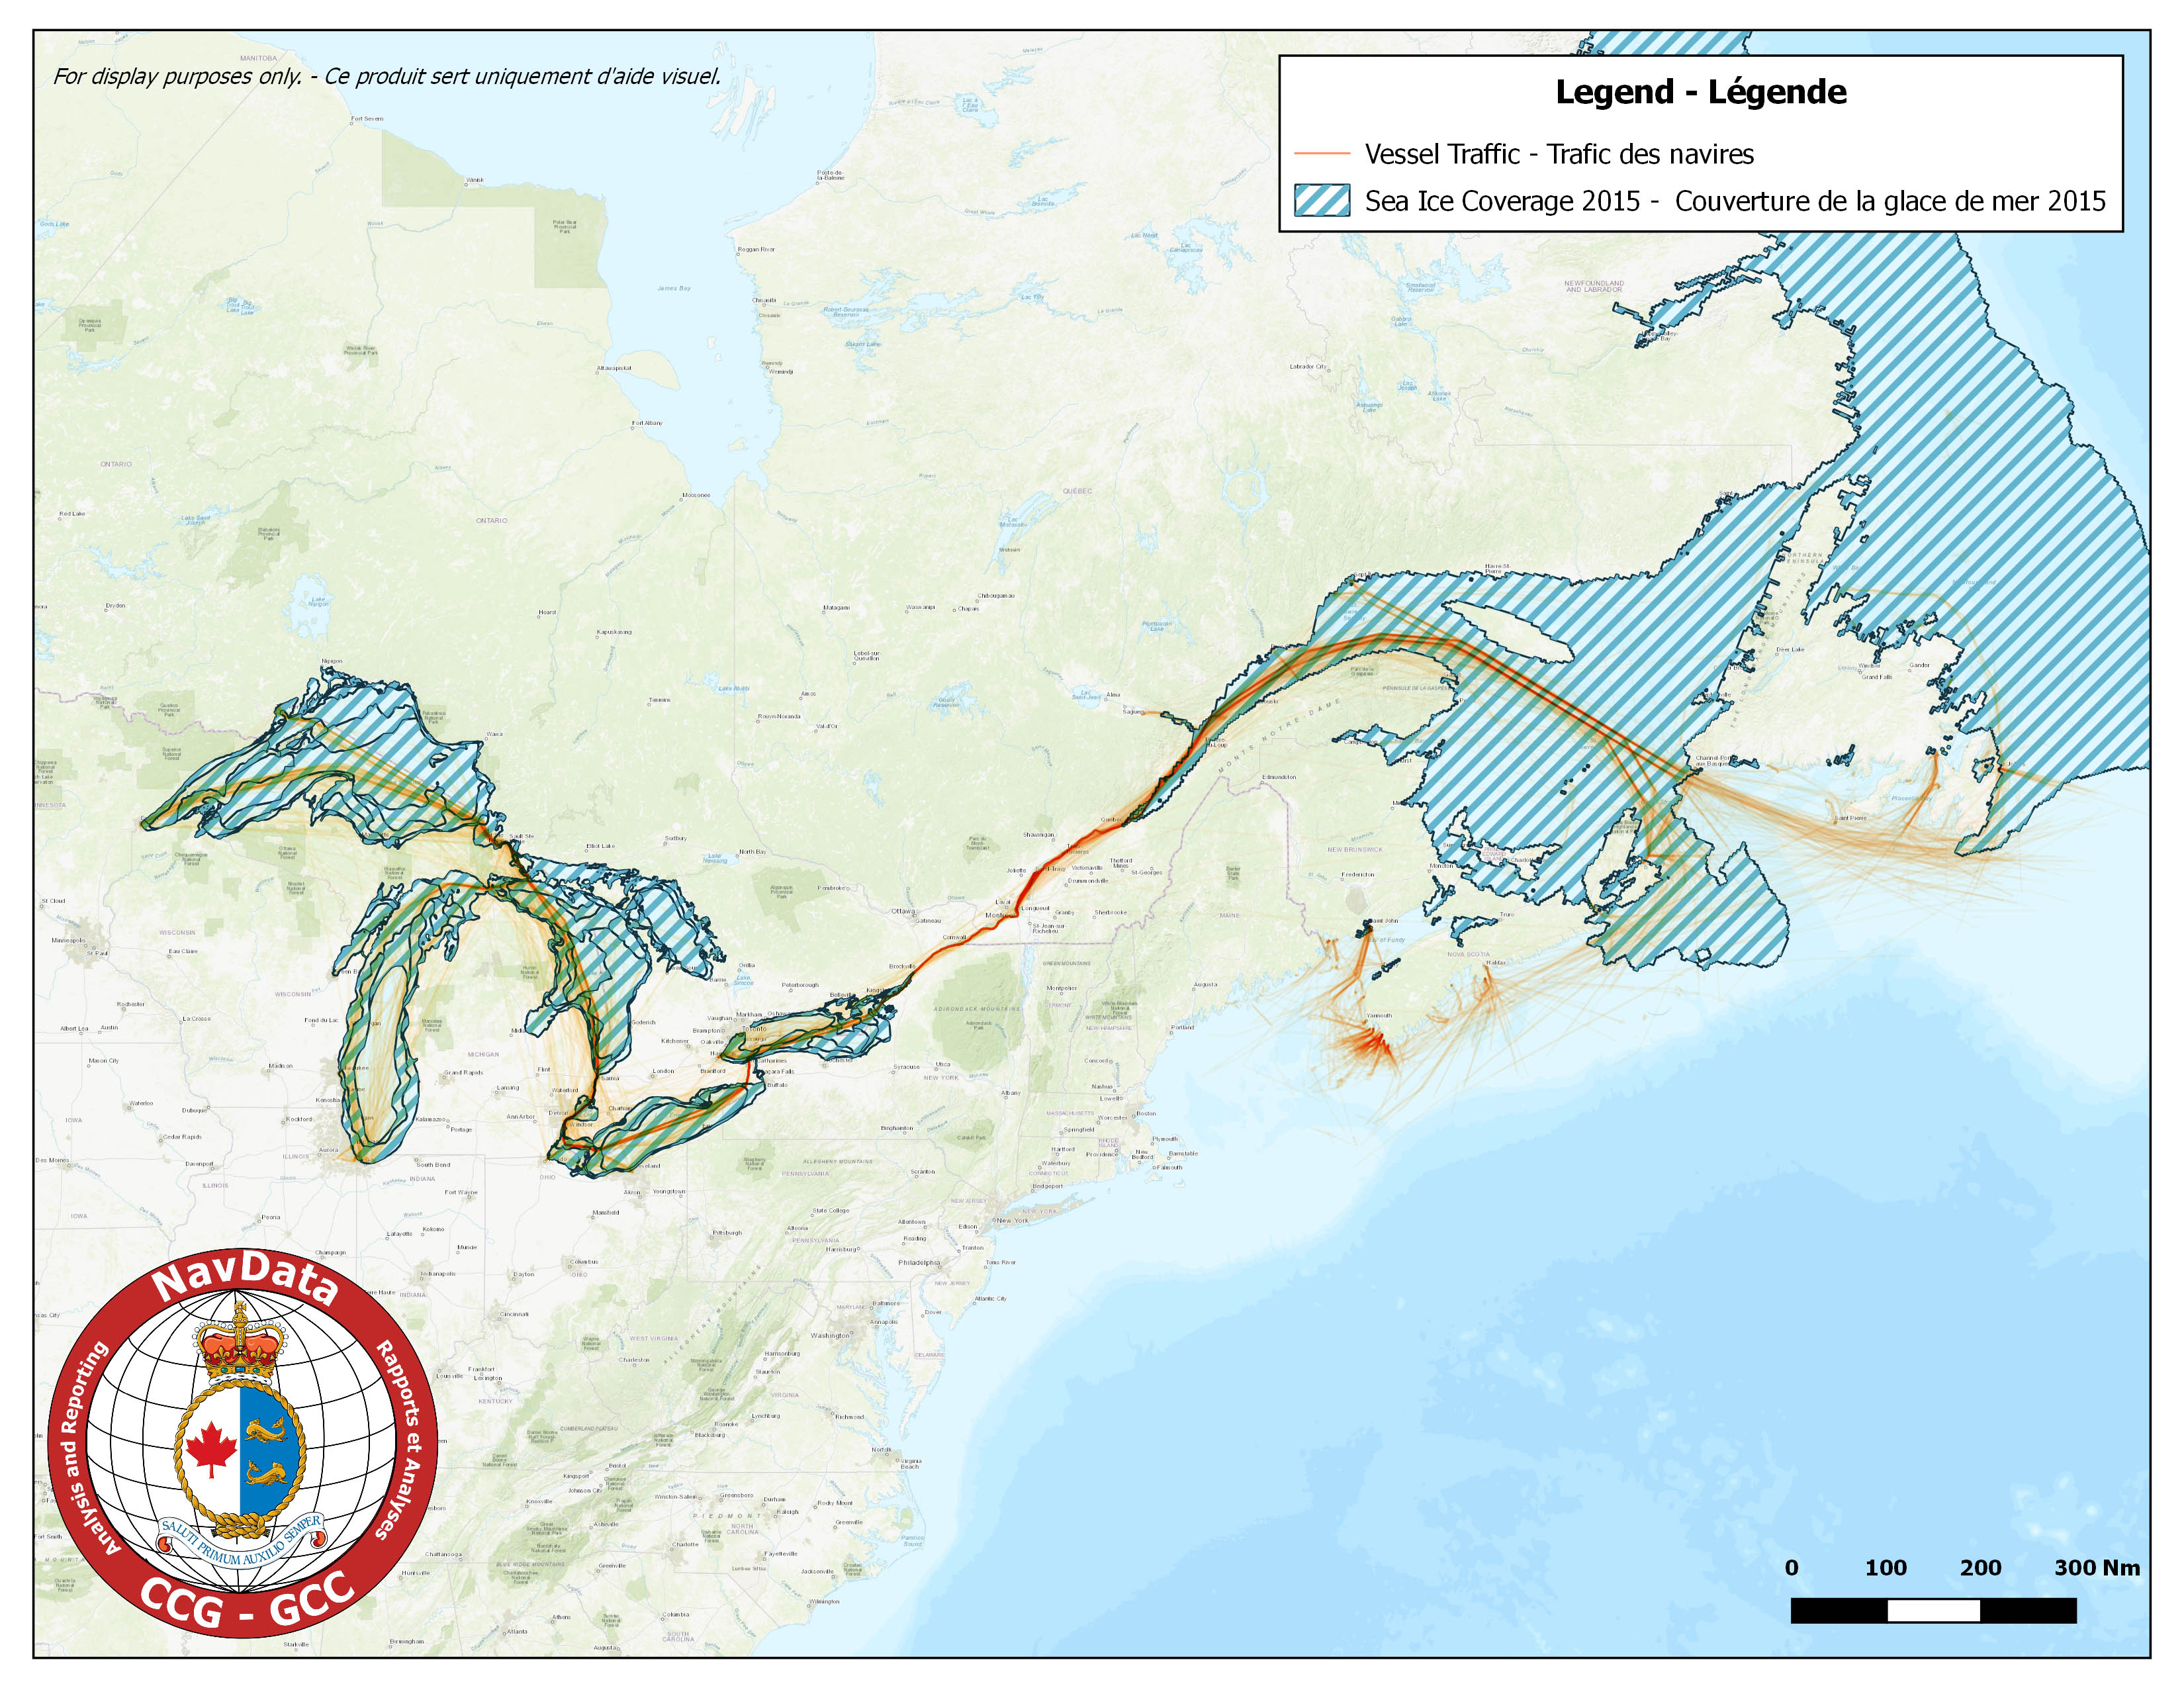 Map showing southern canada traffic density and maximum ice coverage for season of 2015